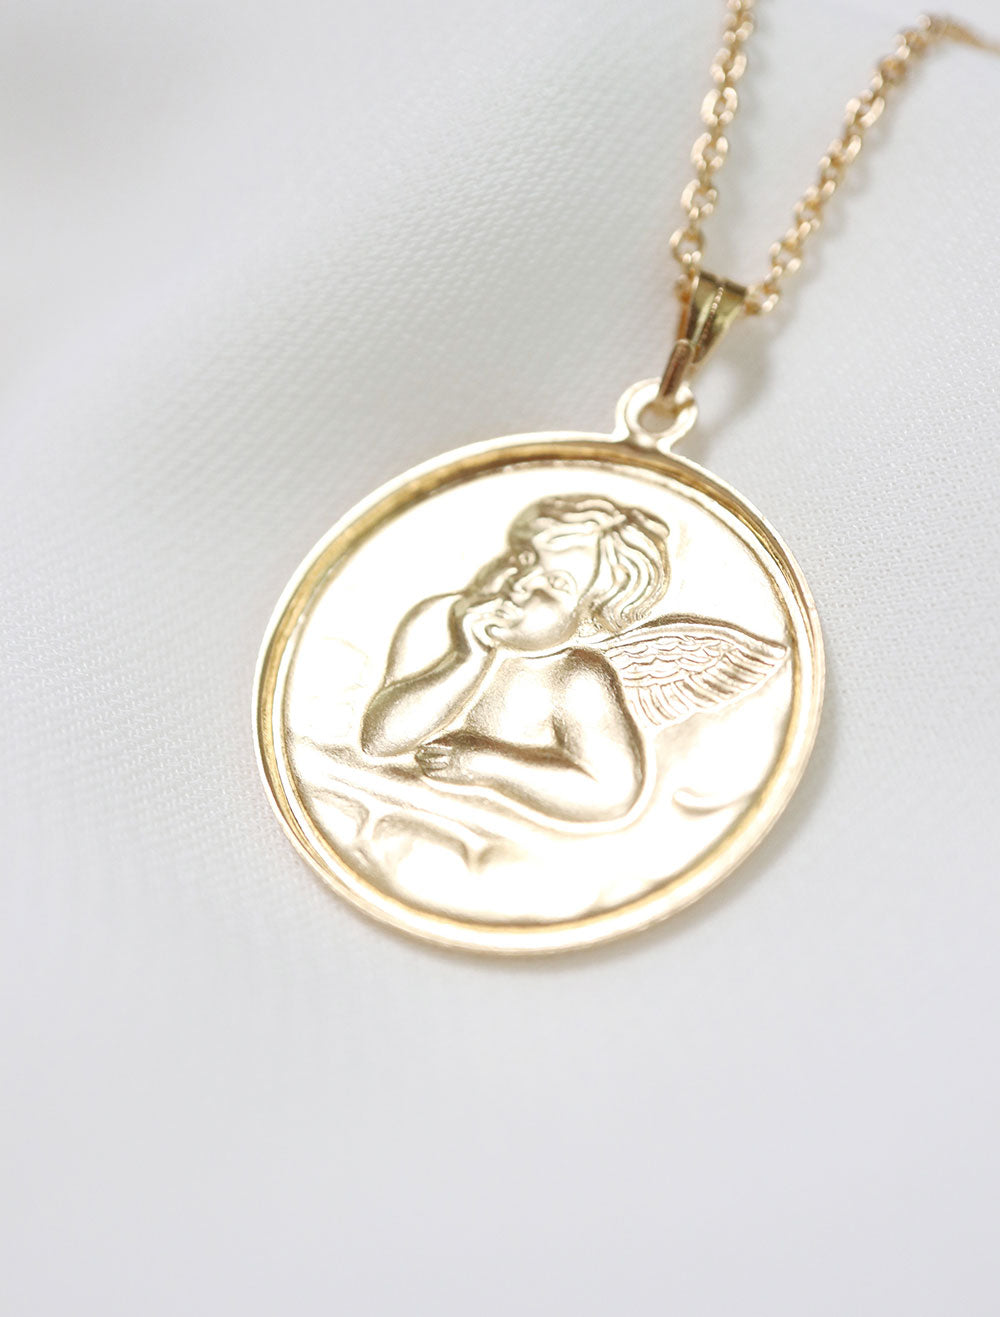 9k Gold Guardian Angel Pendant and Chain Luxury Gift With Extraordinary  Detail. 